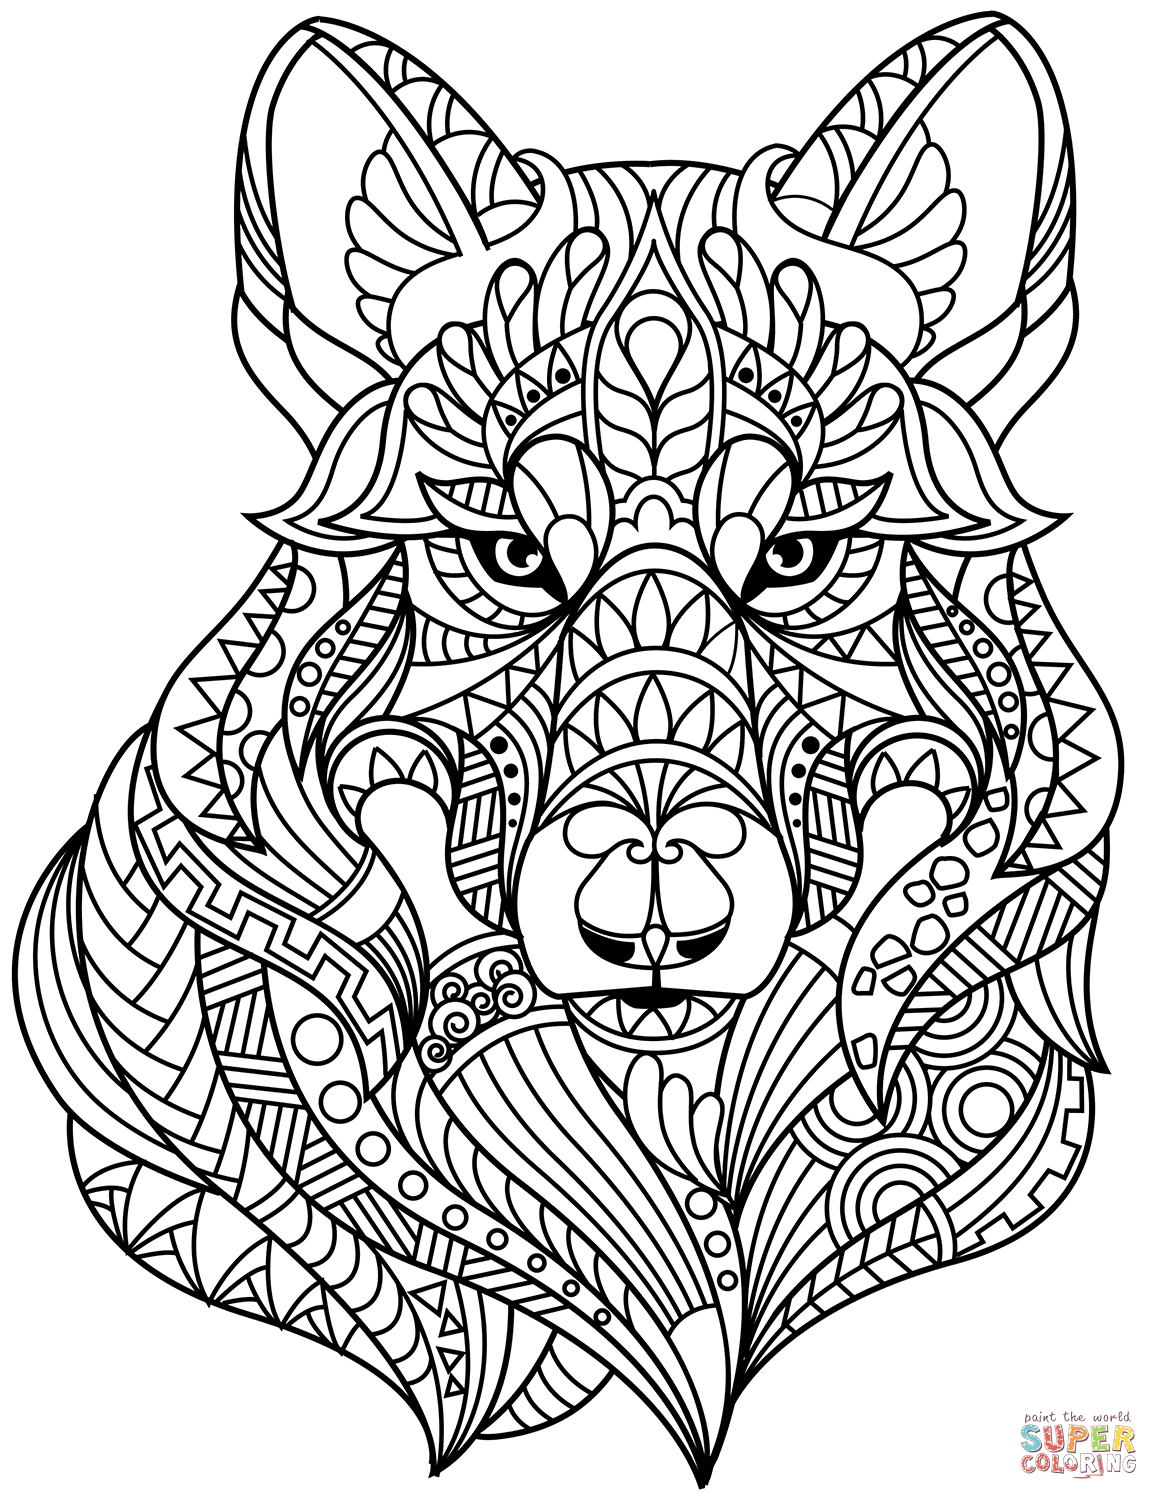 Wolf Head Zentangle Coloring Page From Zentangle Category. Select From  29500 Printable Crafts Of Cart… | Animal Coloring Pages, Abstract Coloring  Pages, Wolf Colors - Coloring Home